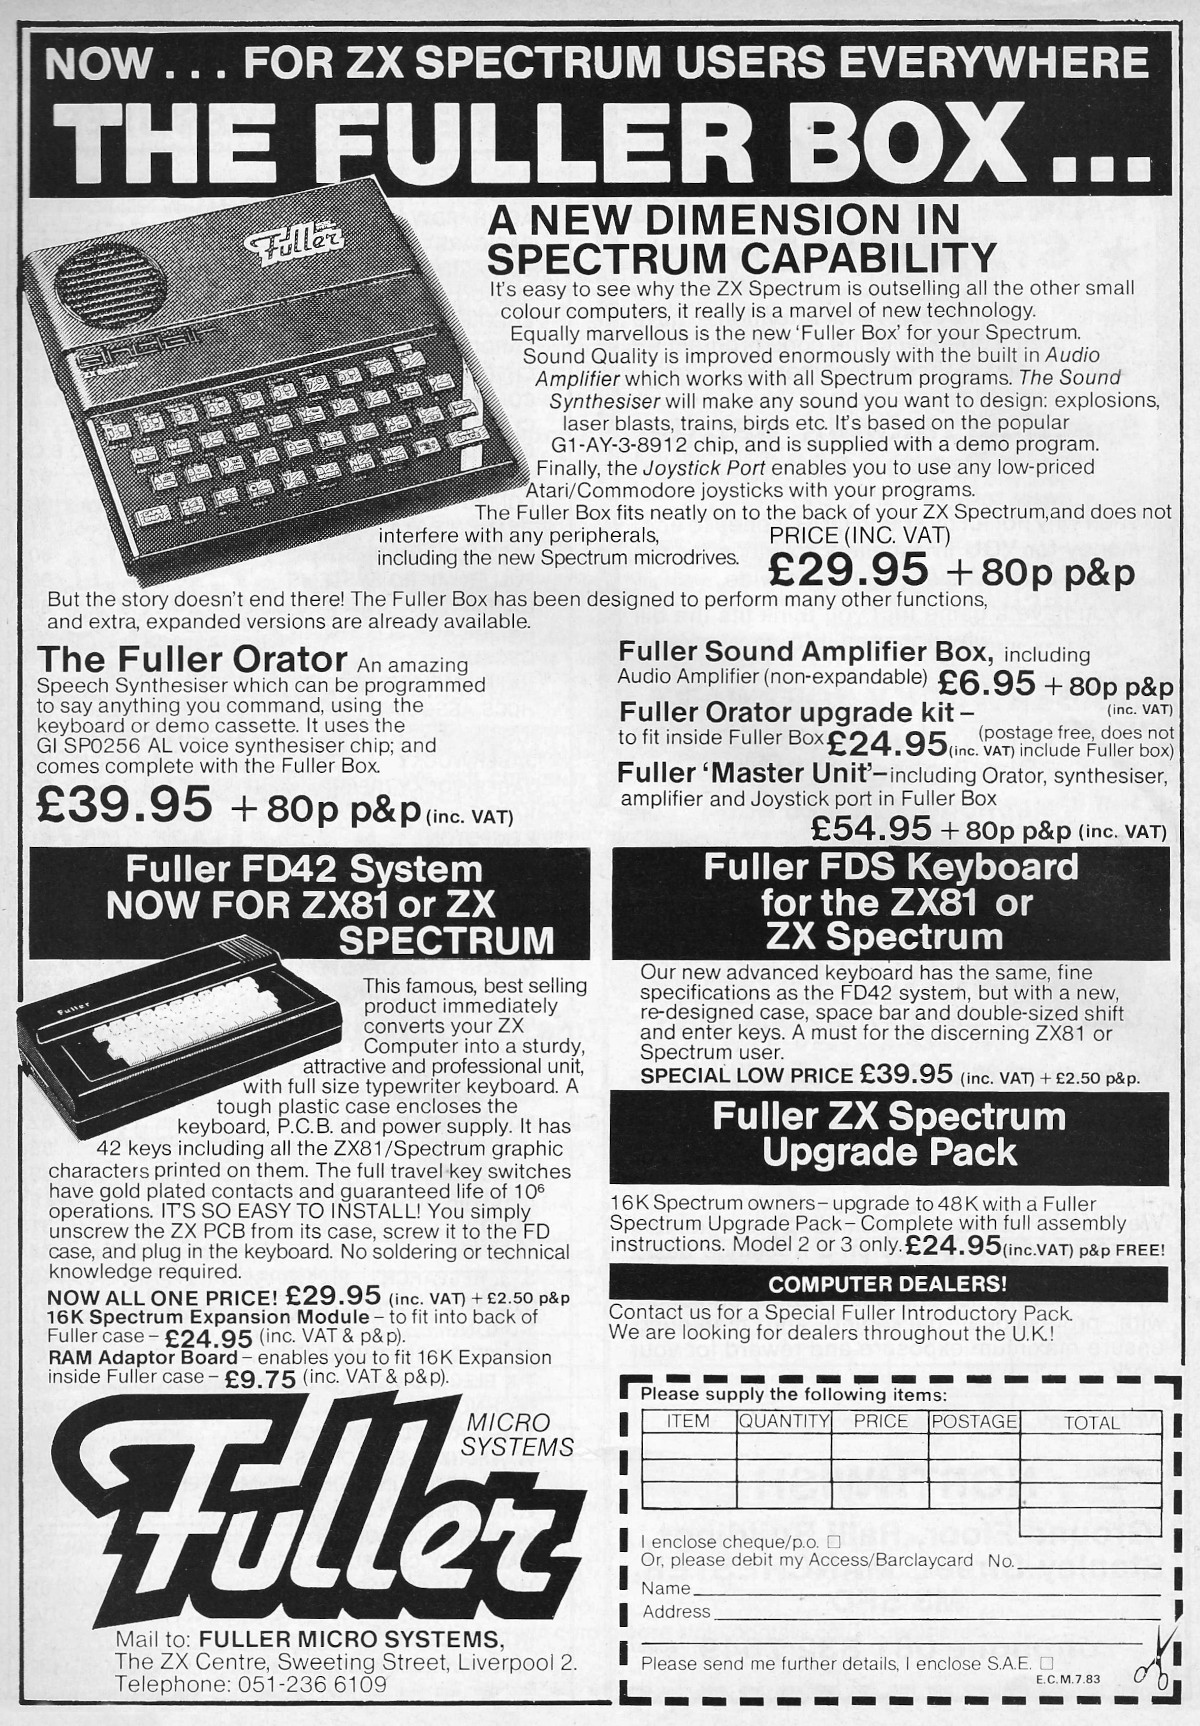 Fuller was another of the many ZX81/Spectrum third-party companies, in this case producing a novel speaker attachment for the Speccy, as well as a proper keyboard for either machine. From Electronics and Computing Monthly, July 1983